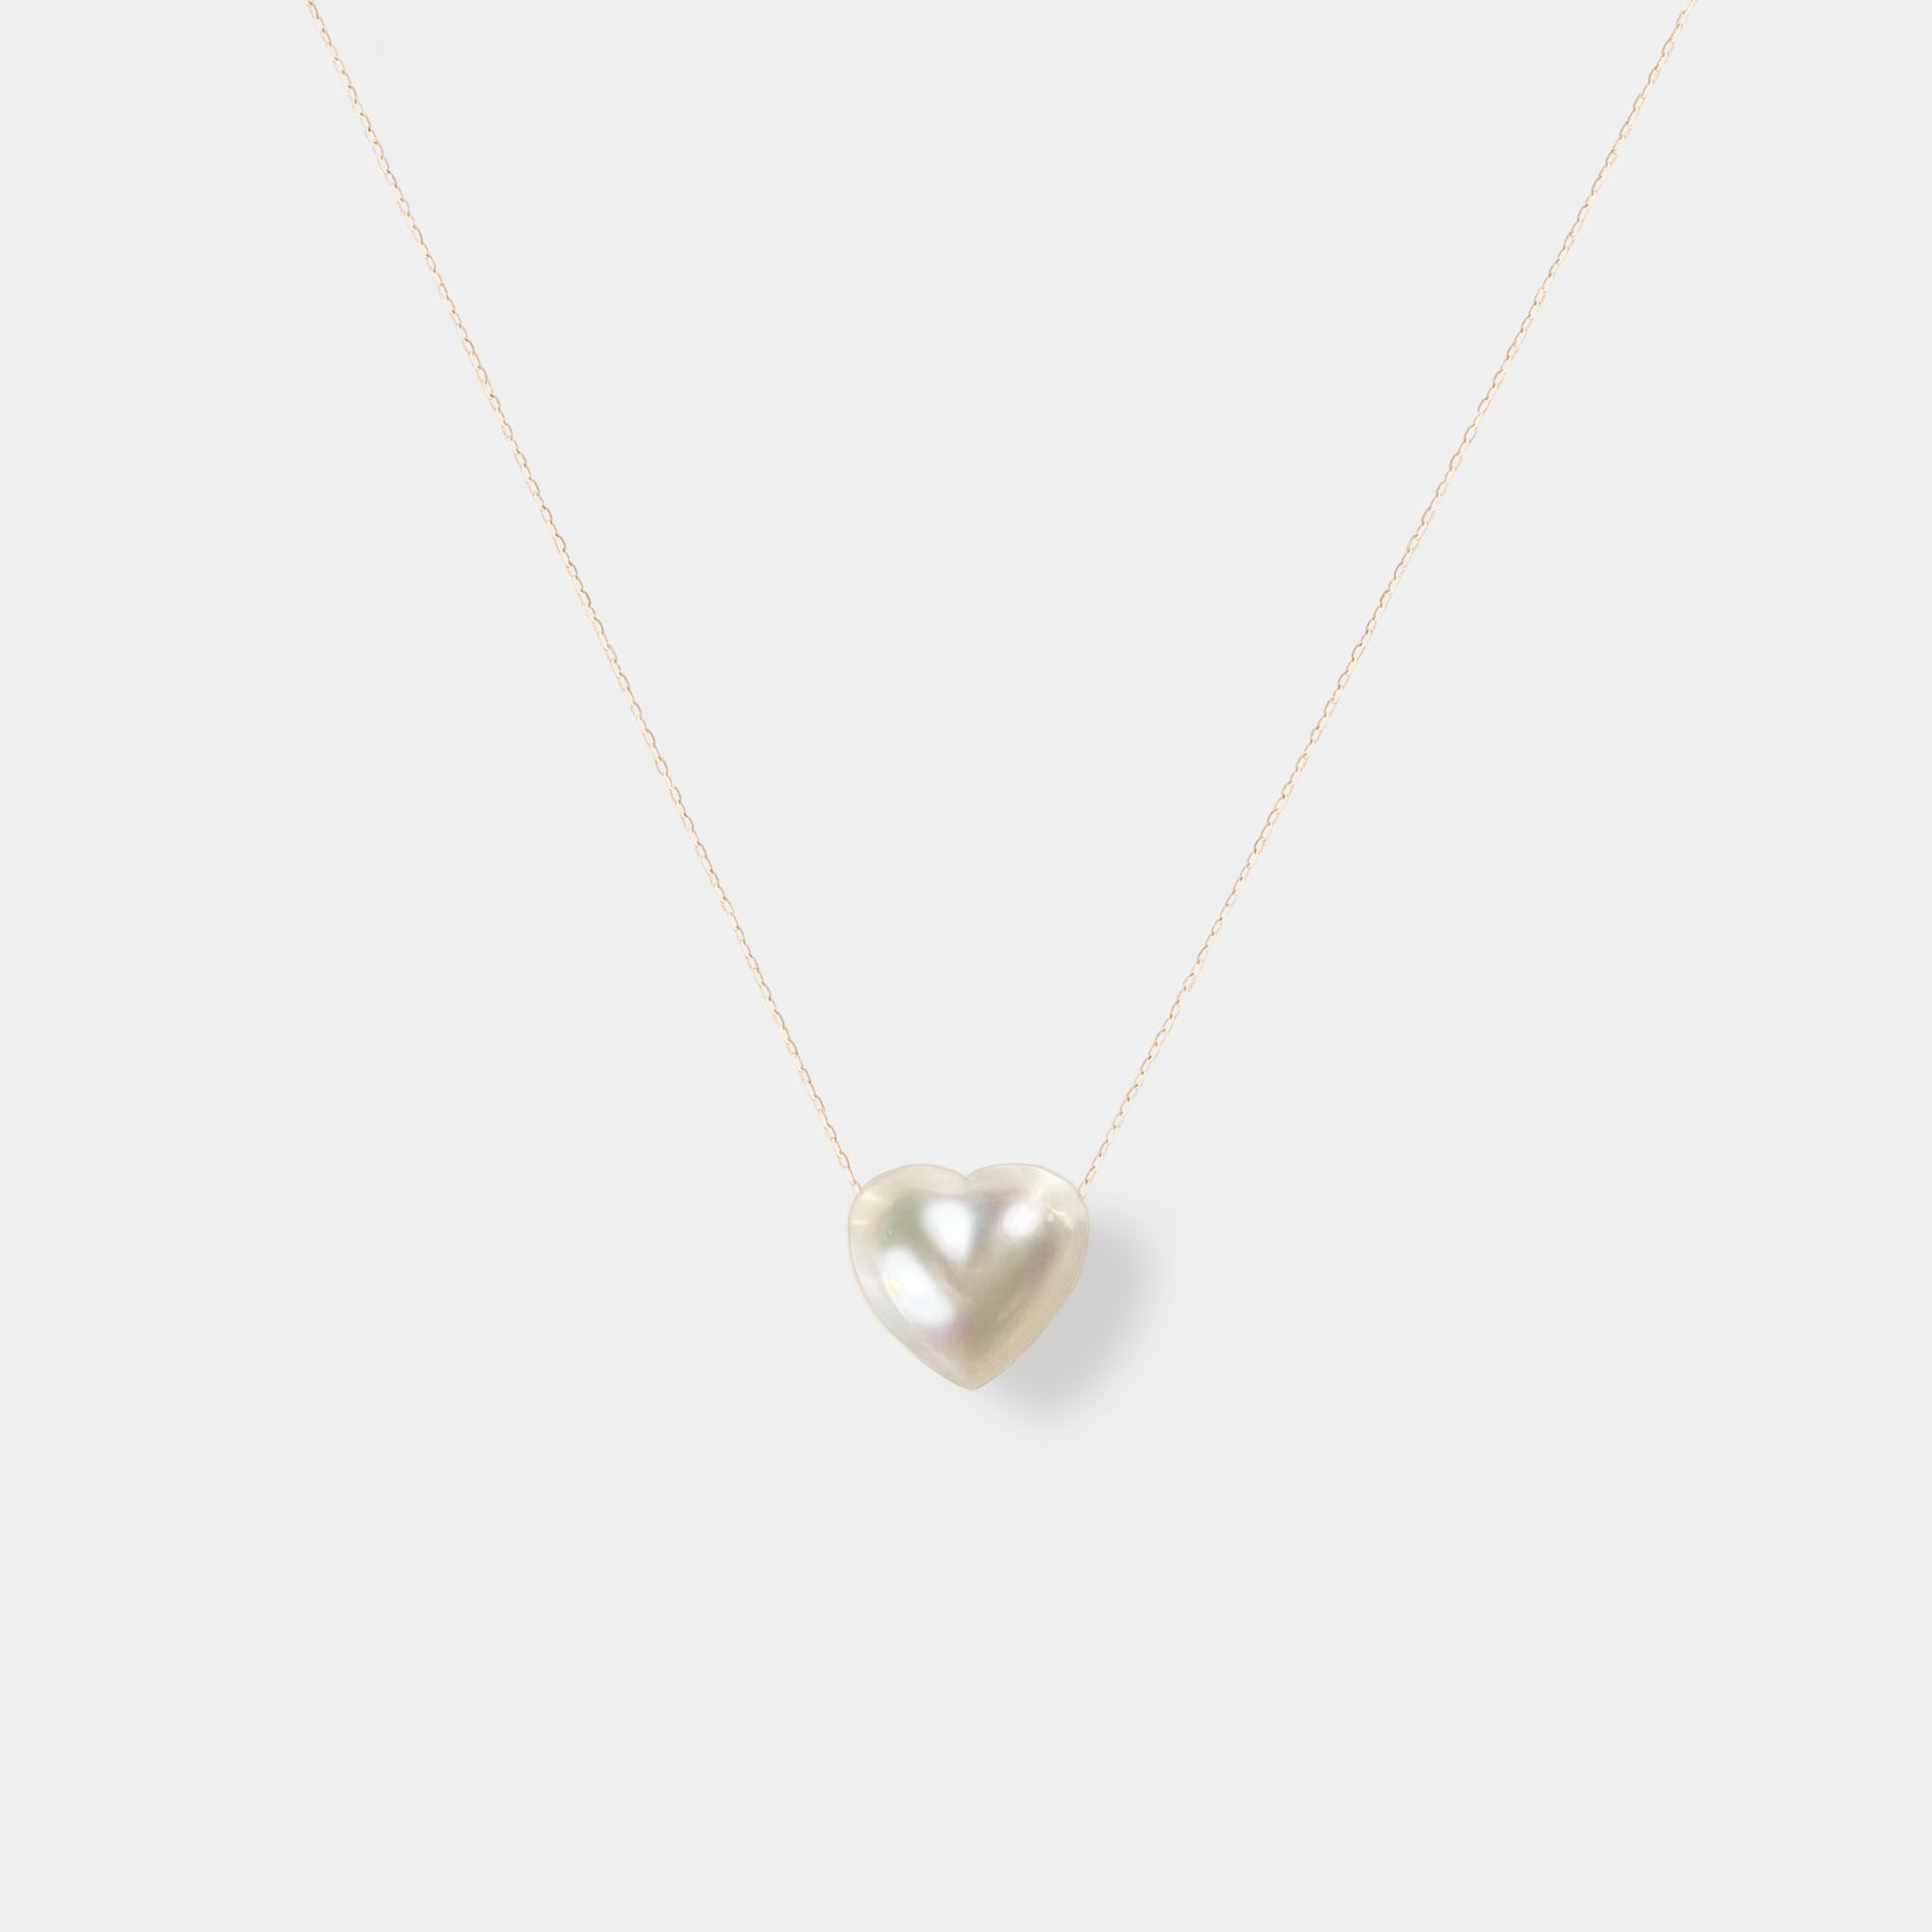 Beautiful heart-shaped Perl necklace, perfect for adding a touch of elegance to any outfit.